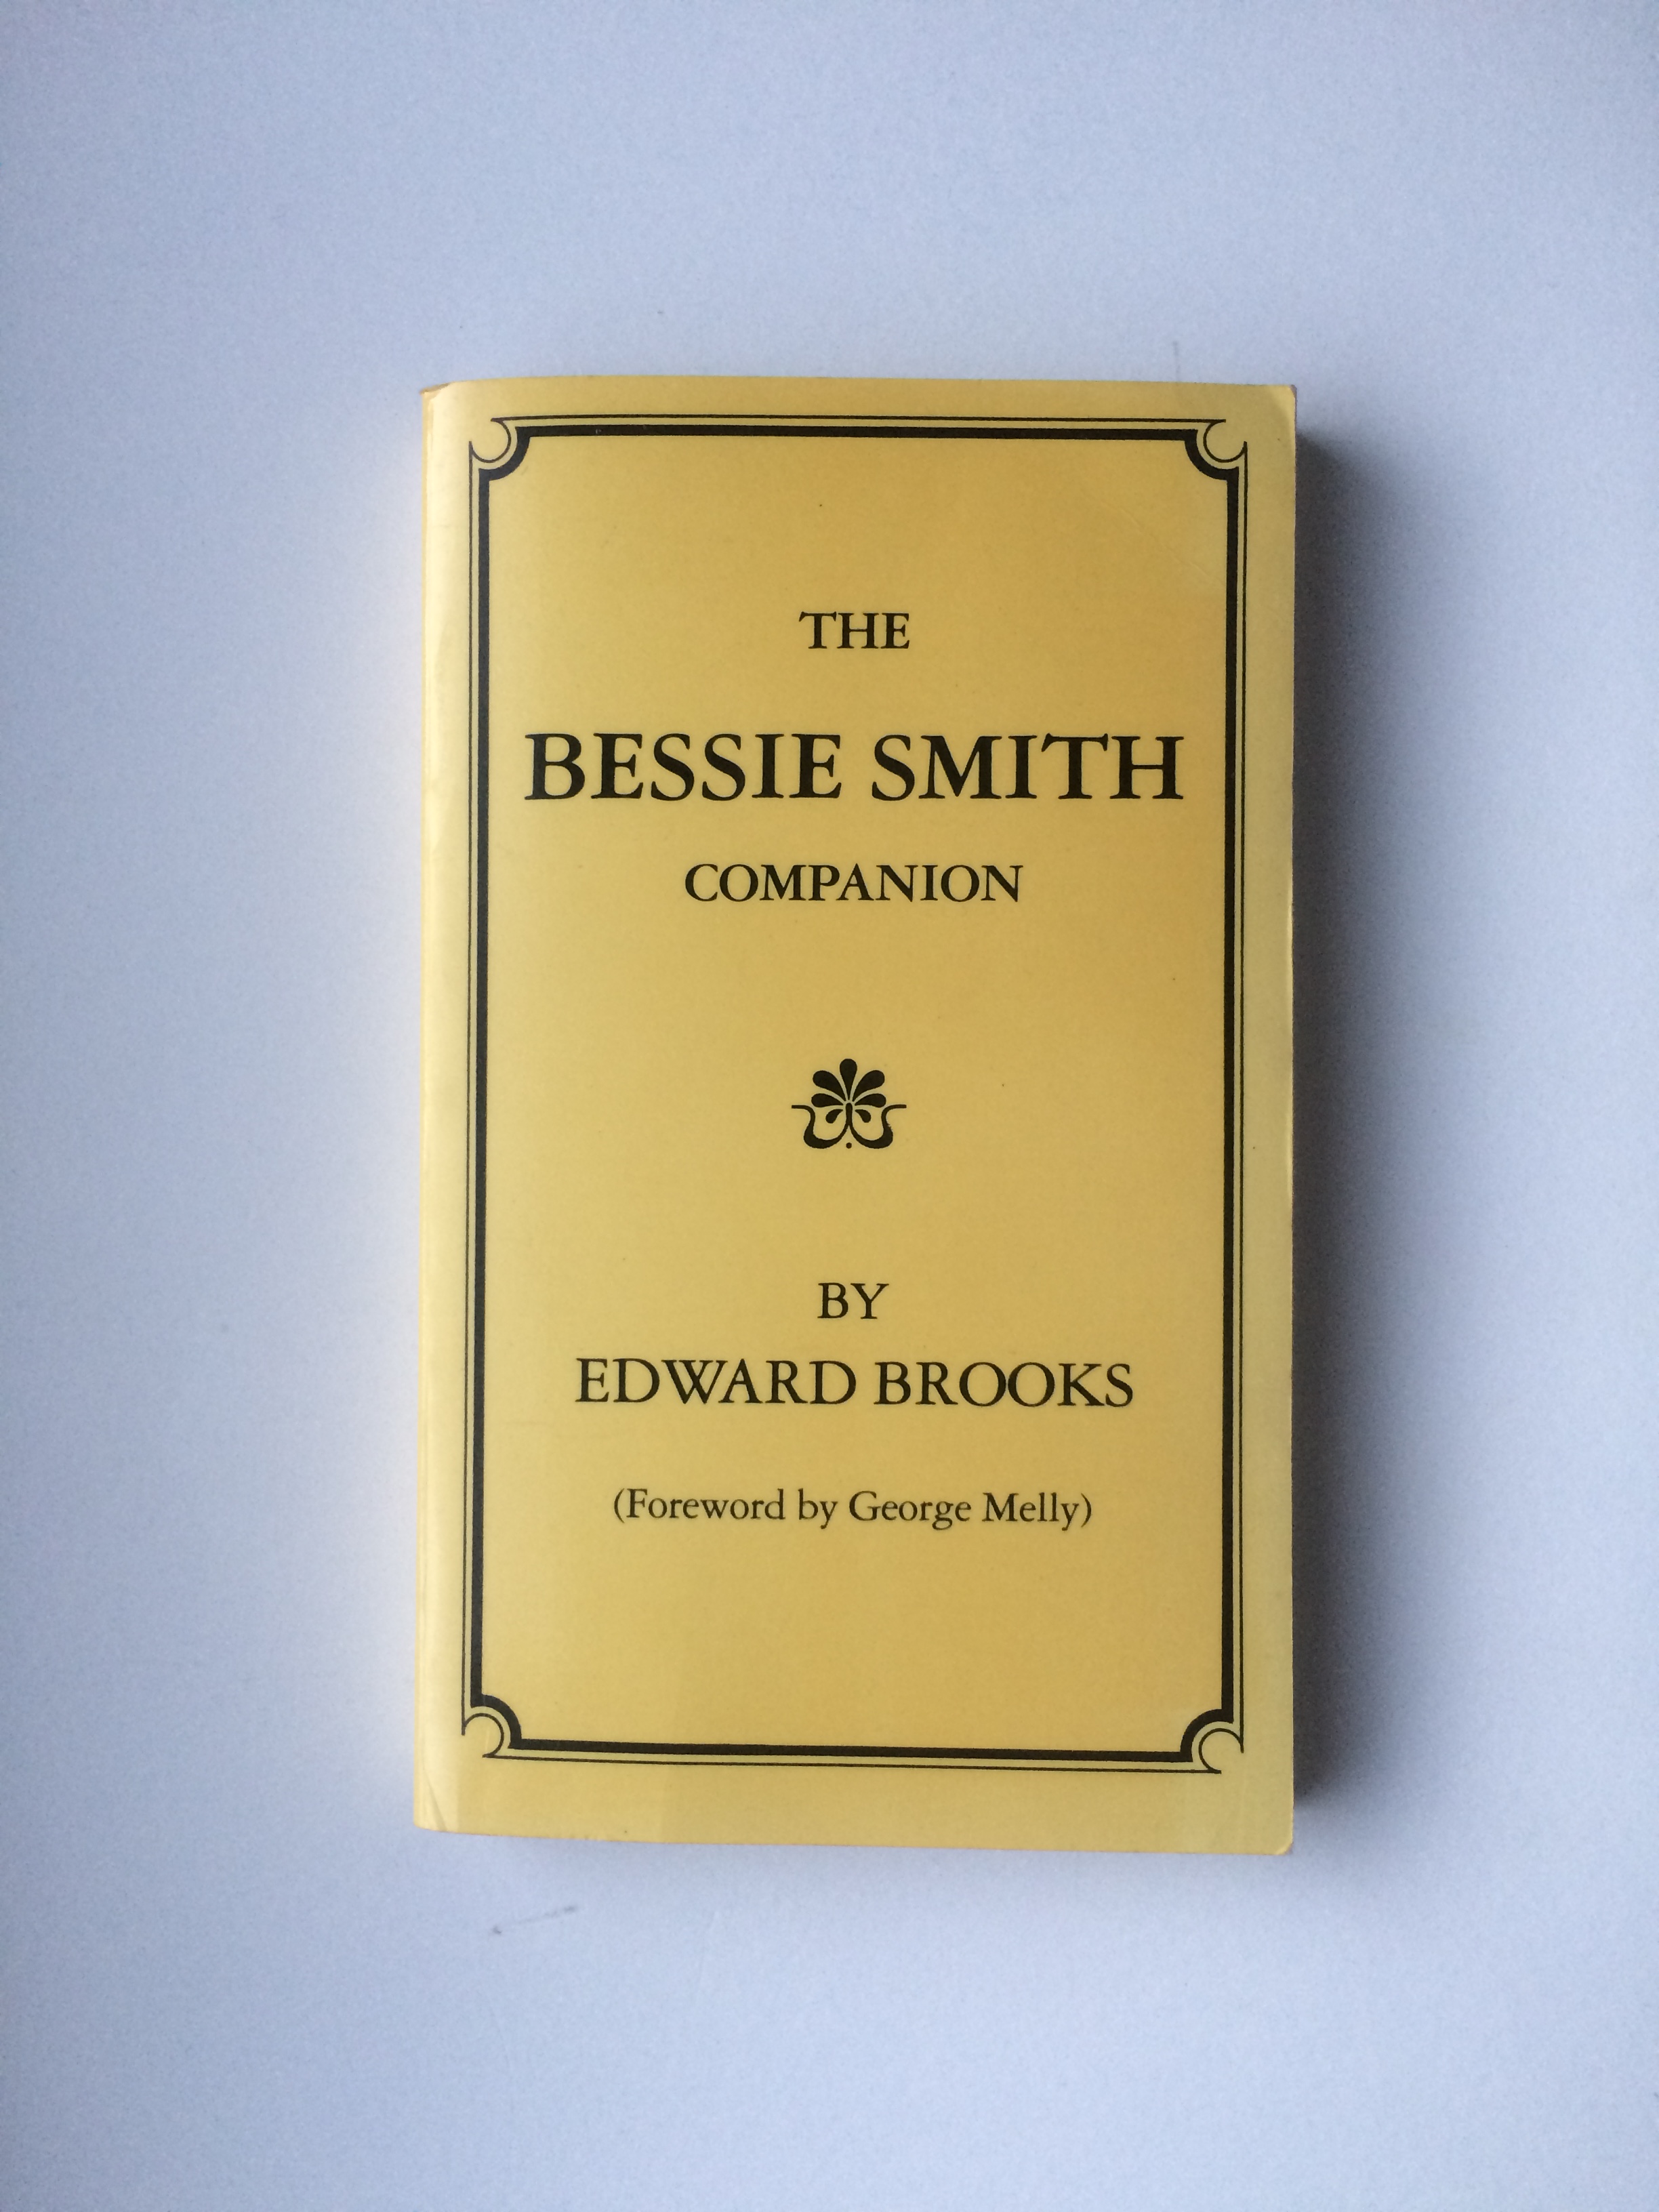 The Bessie Smith Companion: a critical and detailed appreciation of the recordings - Brooks, Edward --- Foreword by George Melly